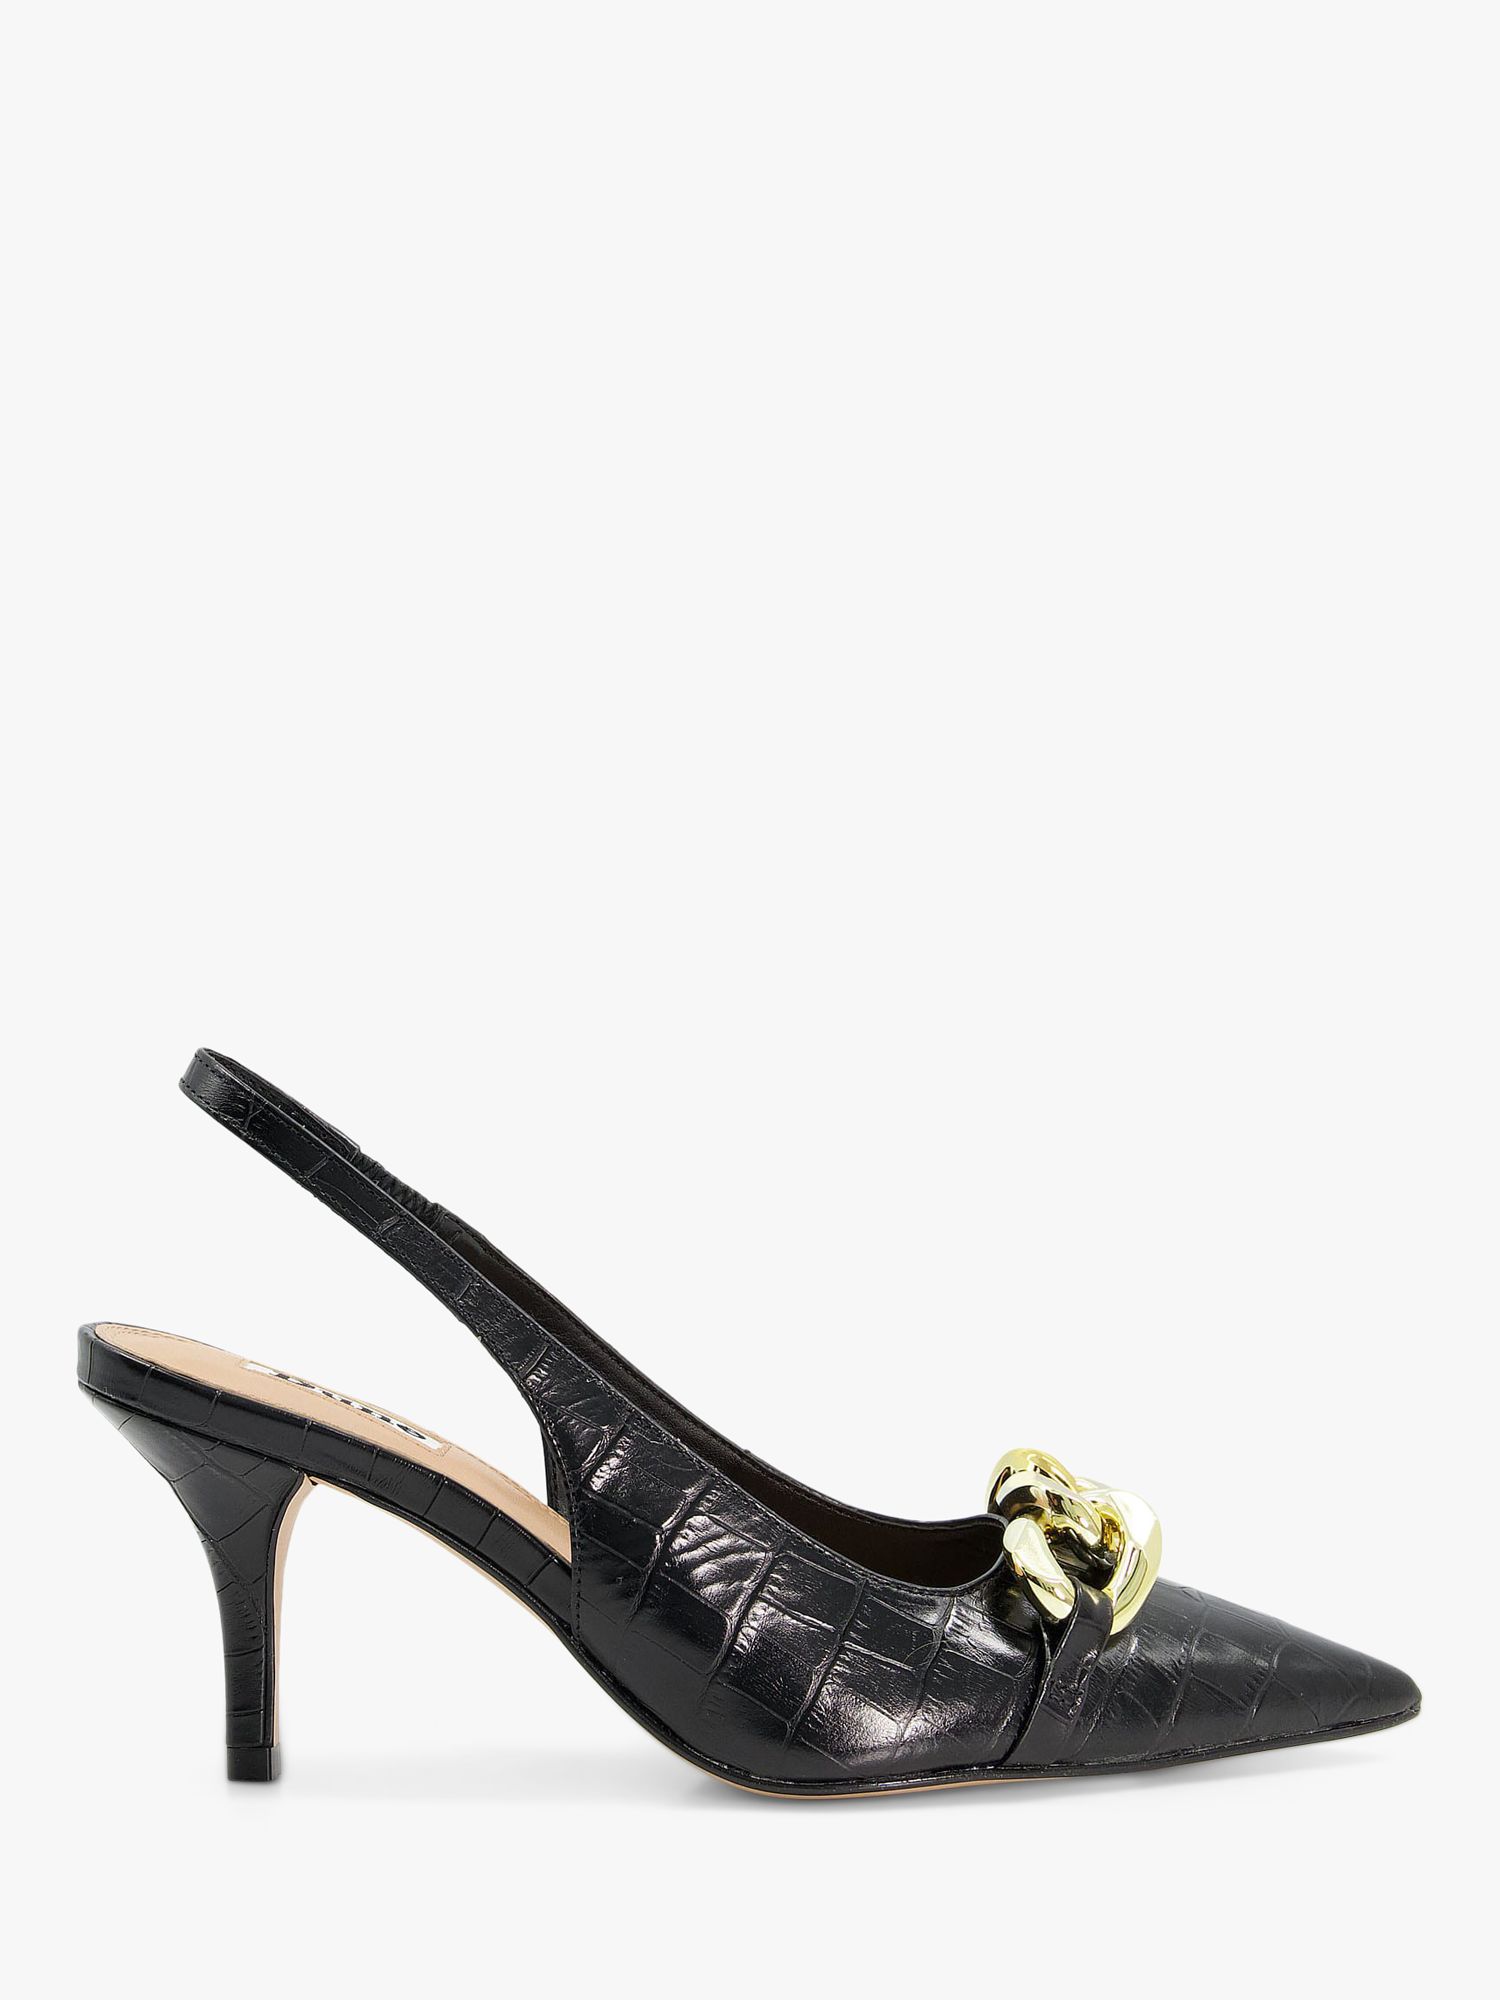 Dune Canary Leather Croc Slingback Court Shoes, Black at John Lewis ...